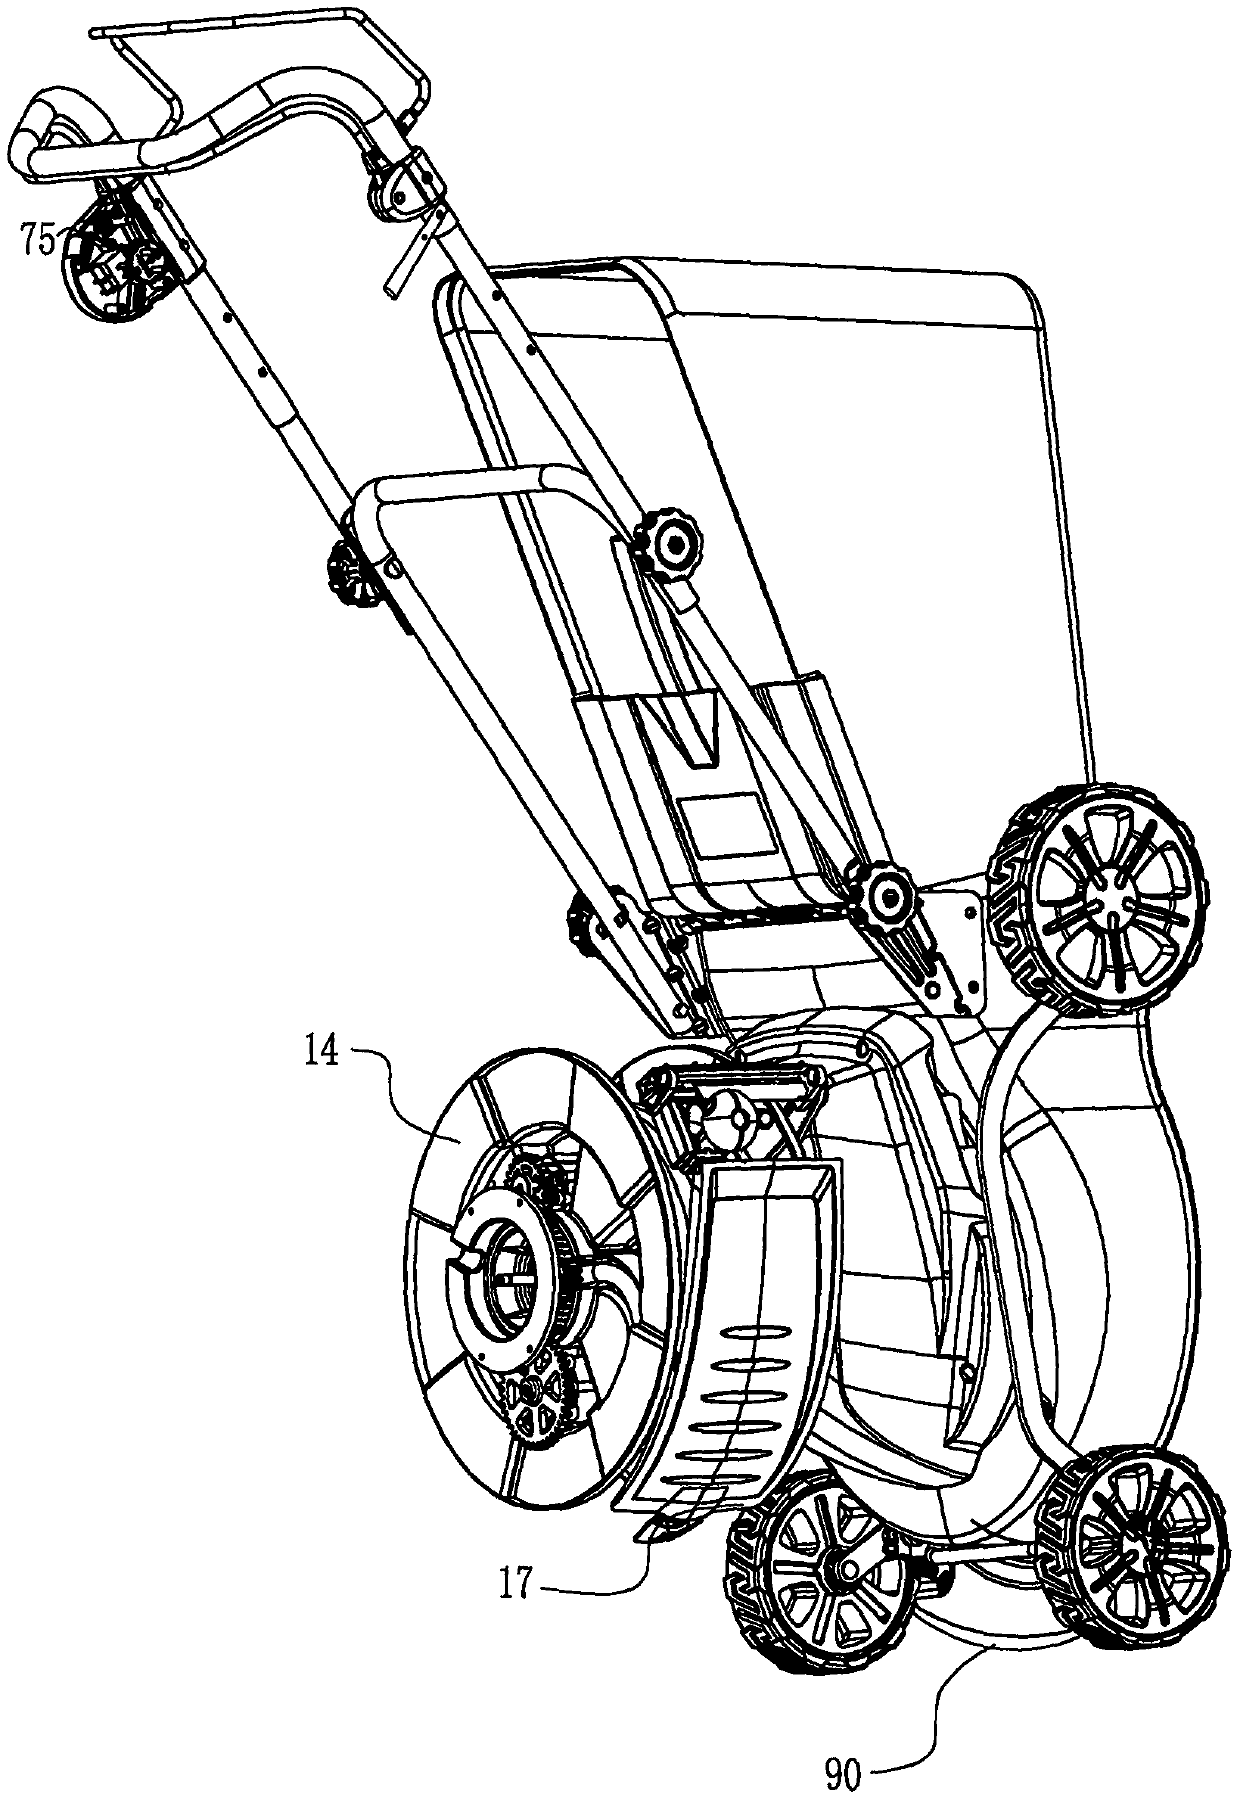 Connection charging control method by using local area network and multiple intelligent lawn mowers to conduct equipment communication